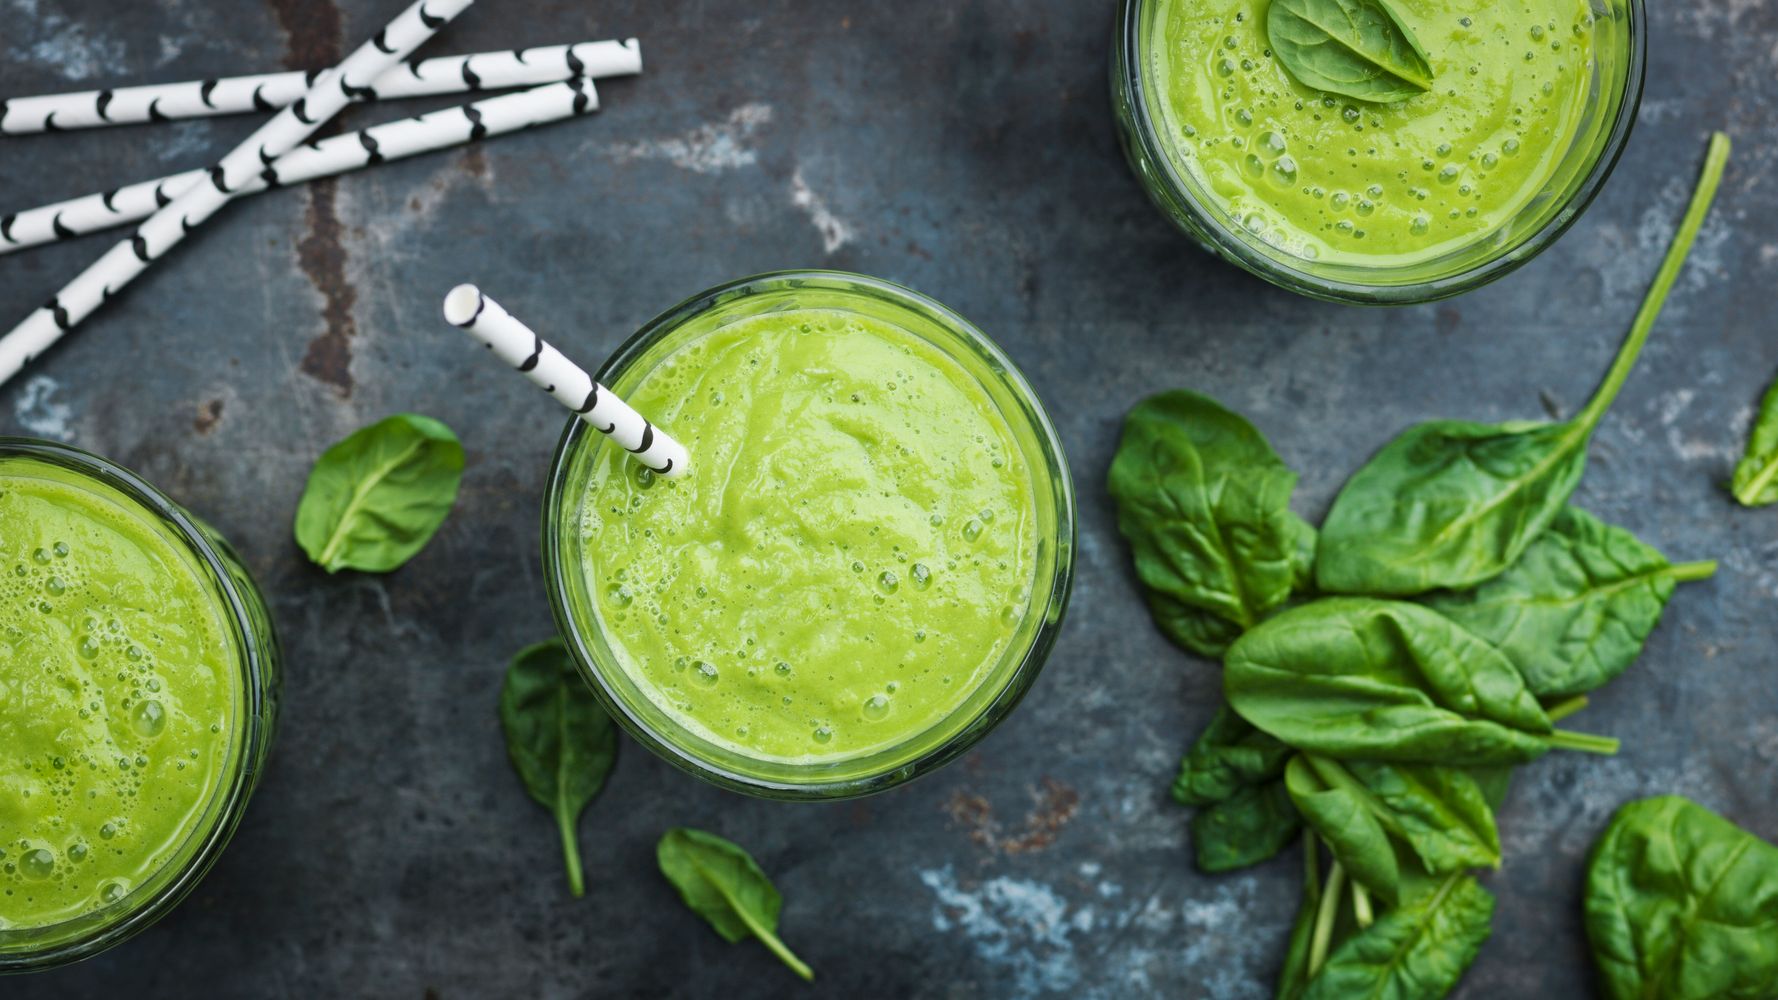 How To Make A Smoothie That'll Keep You Full For Longer